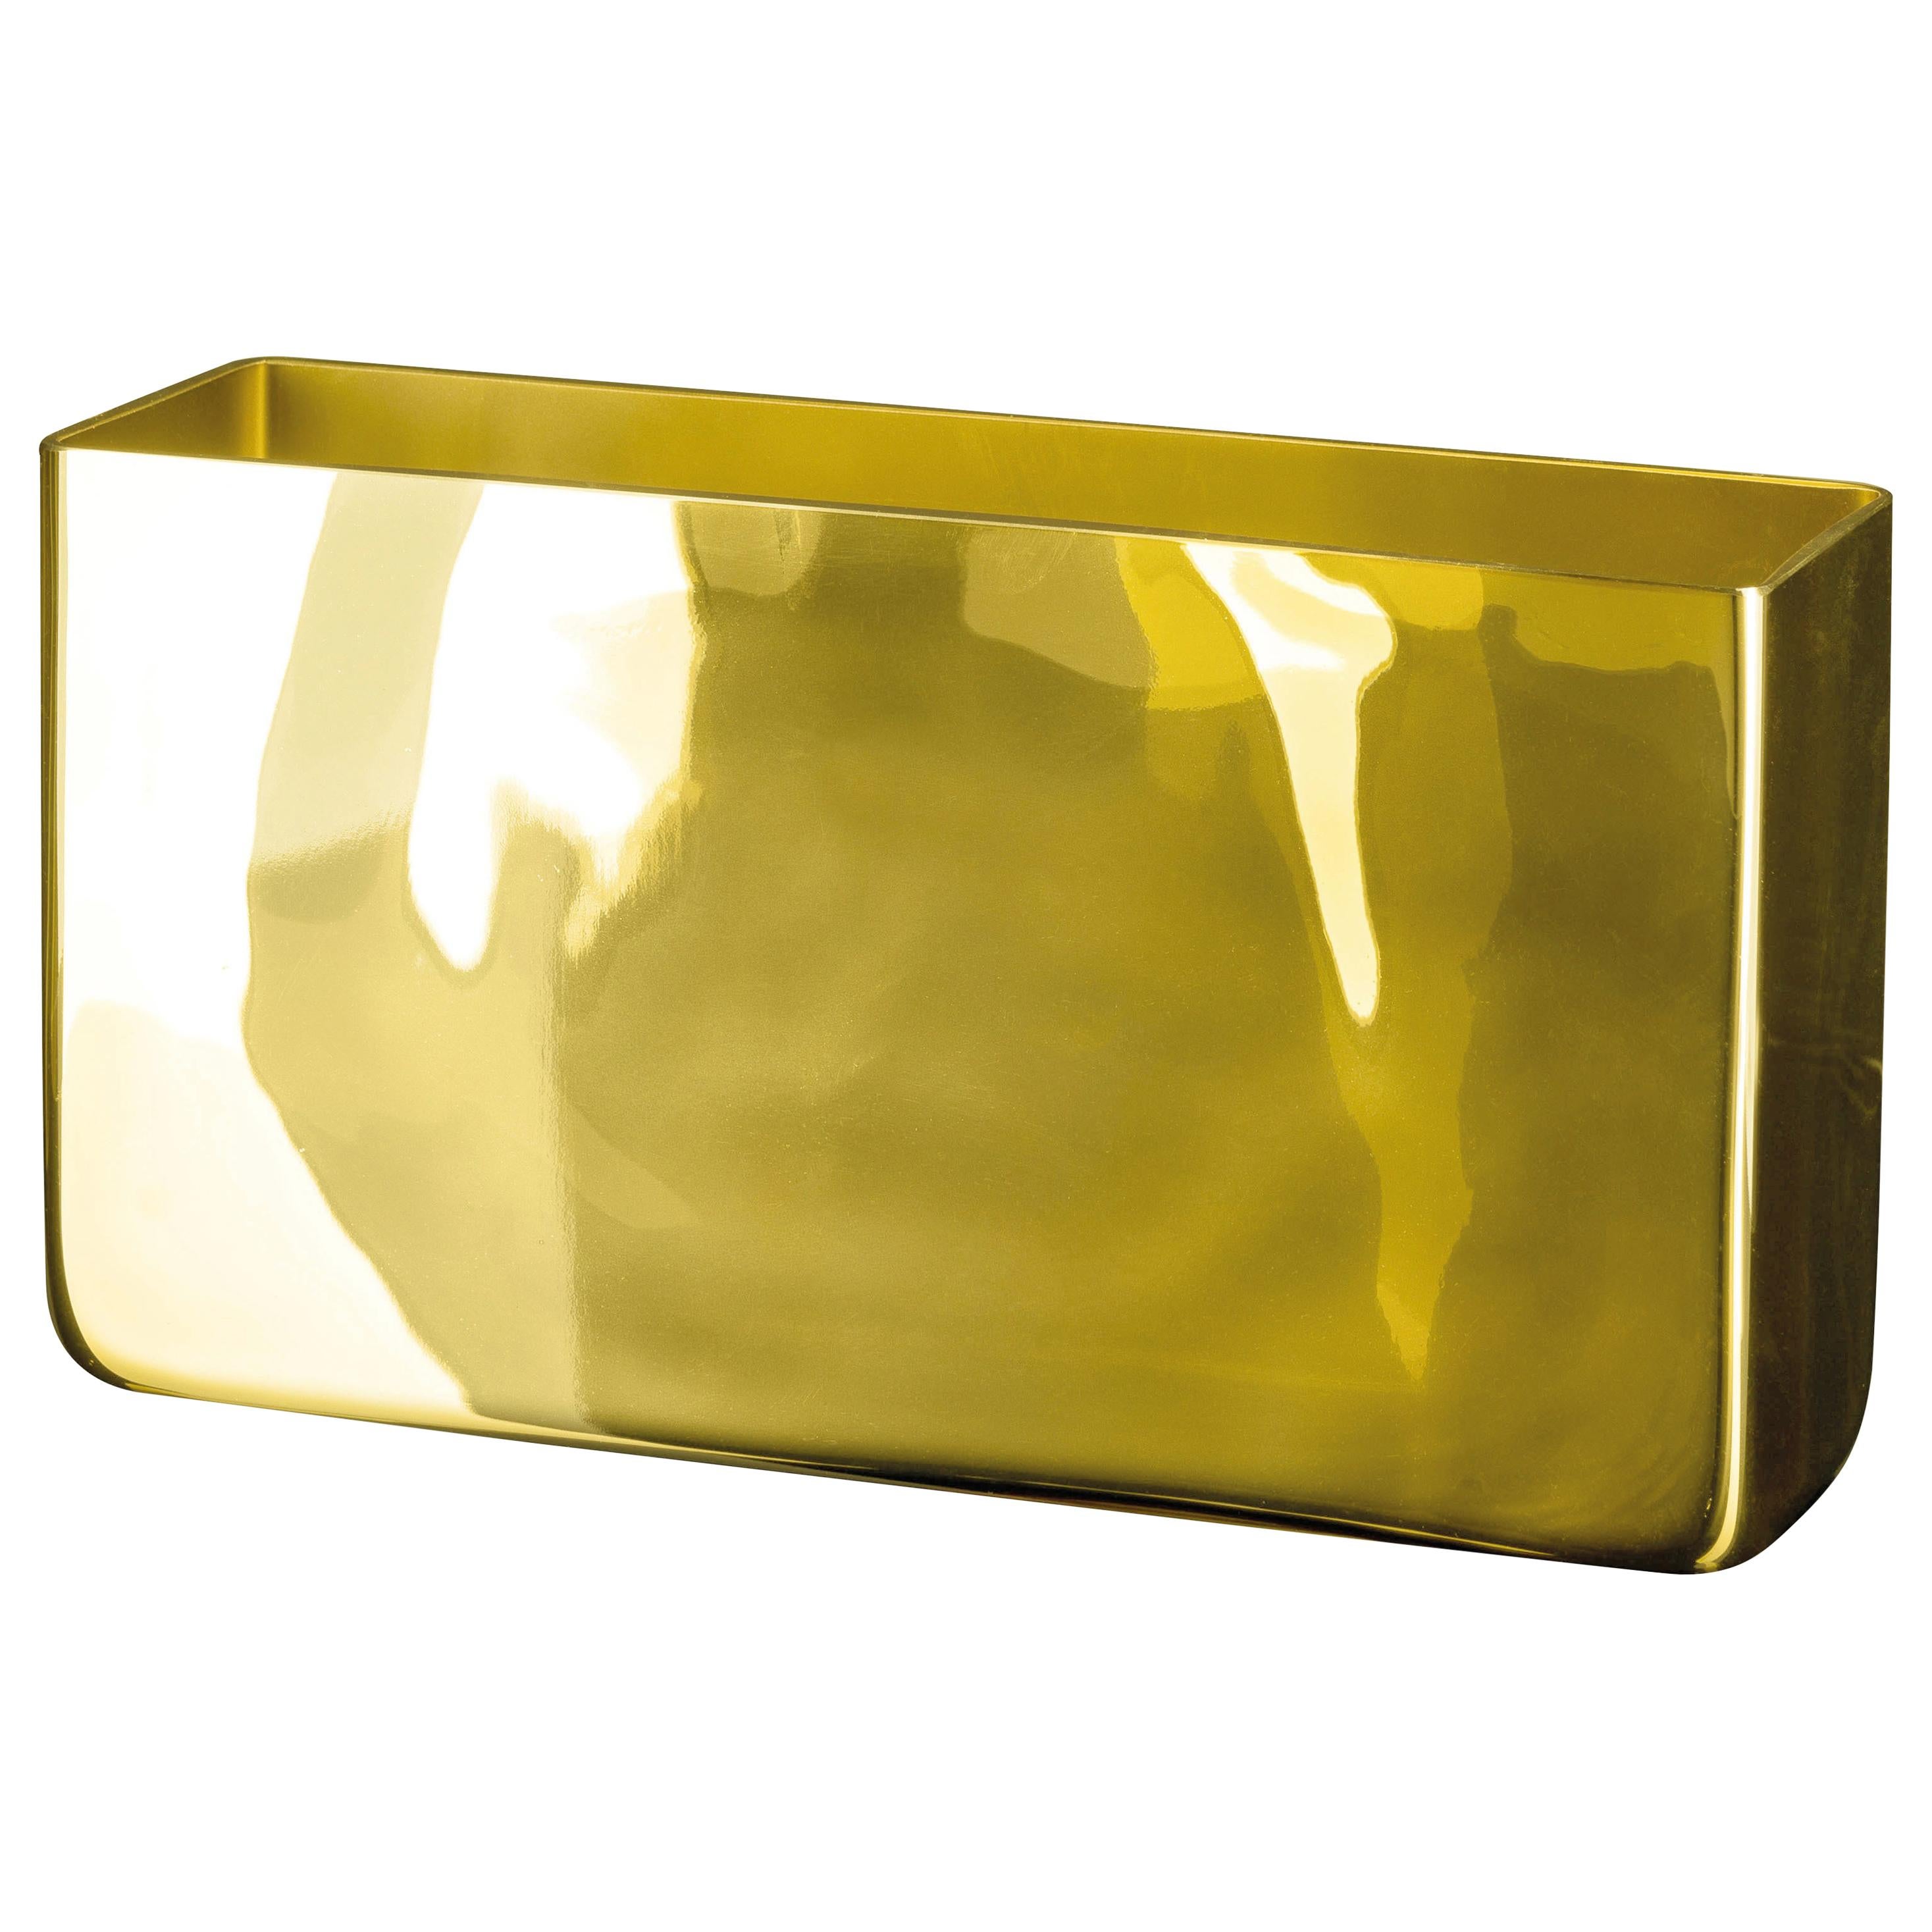 Vase Rectangular Wallet, Gold Color, in Glass, Italy